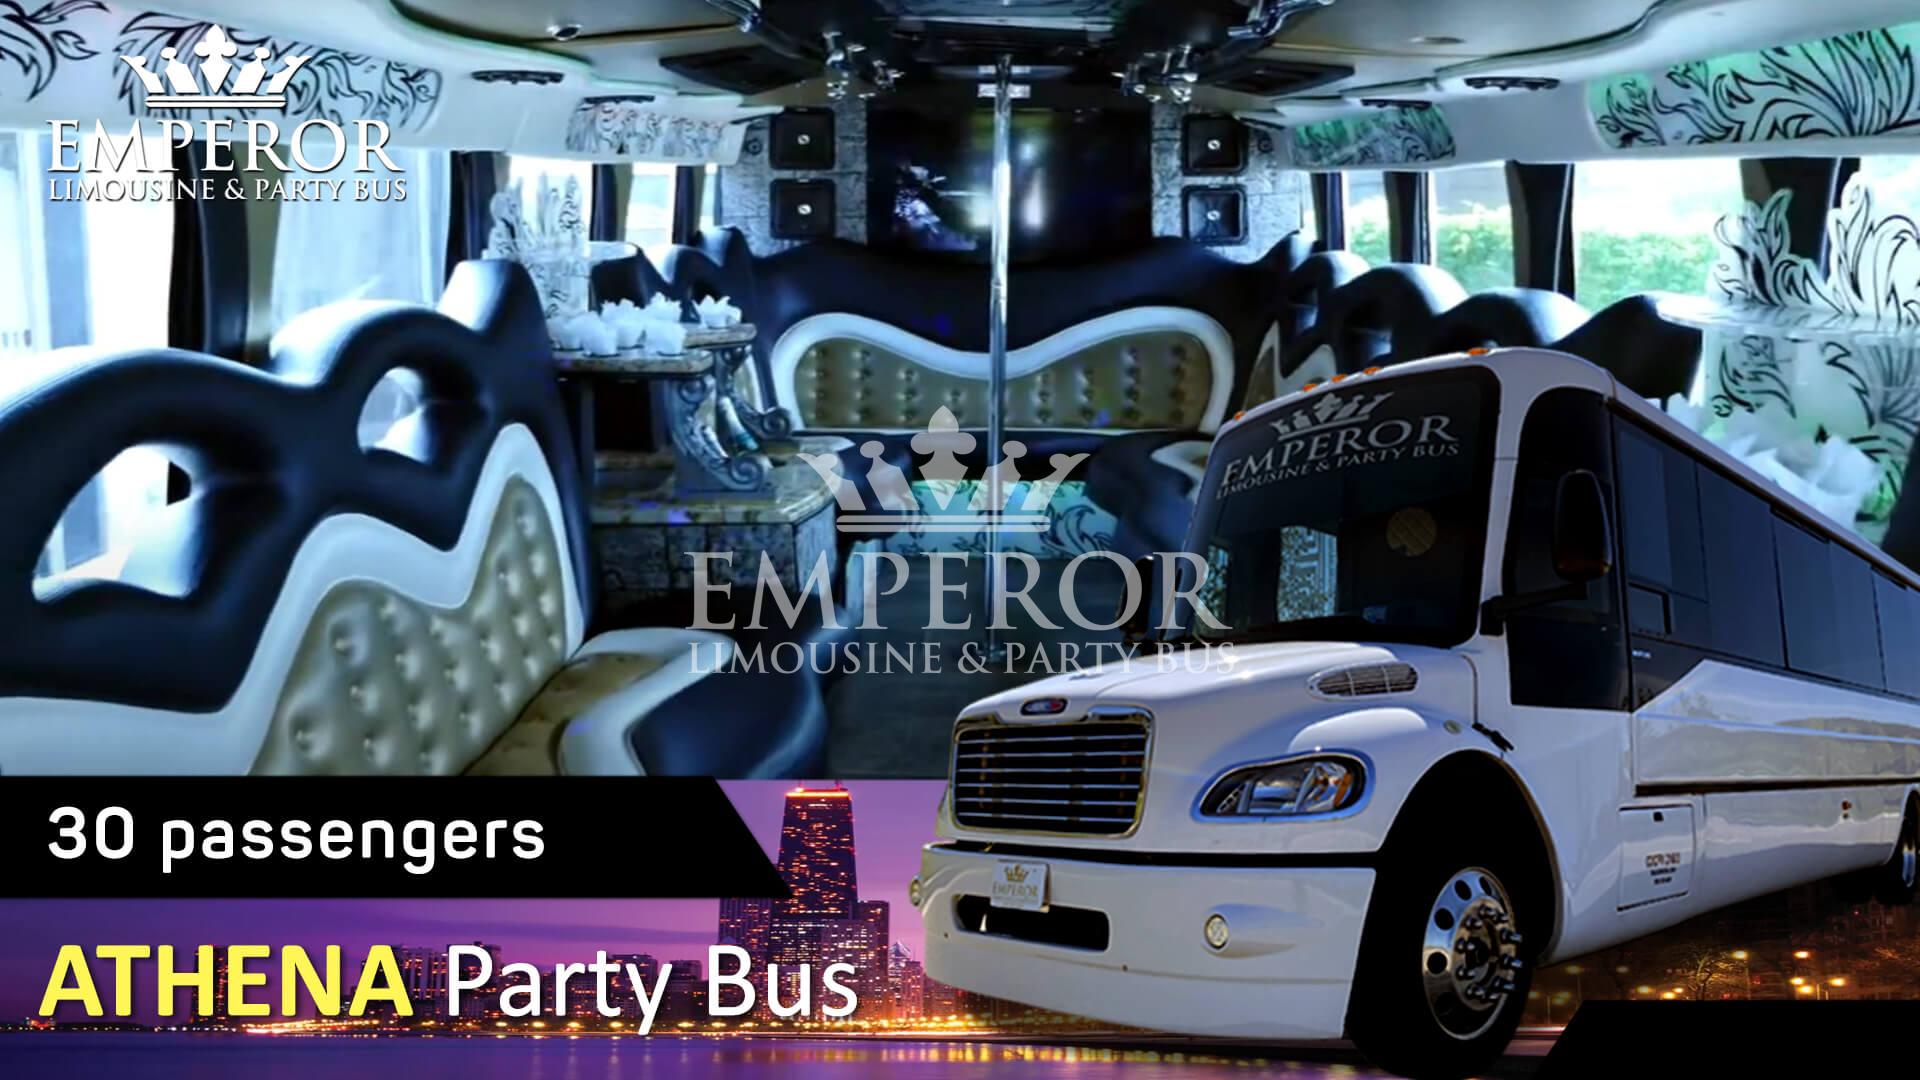 Party bus rental service in Bloomingdale - Athena Edition